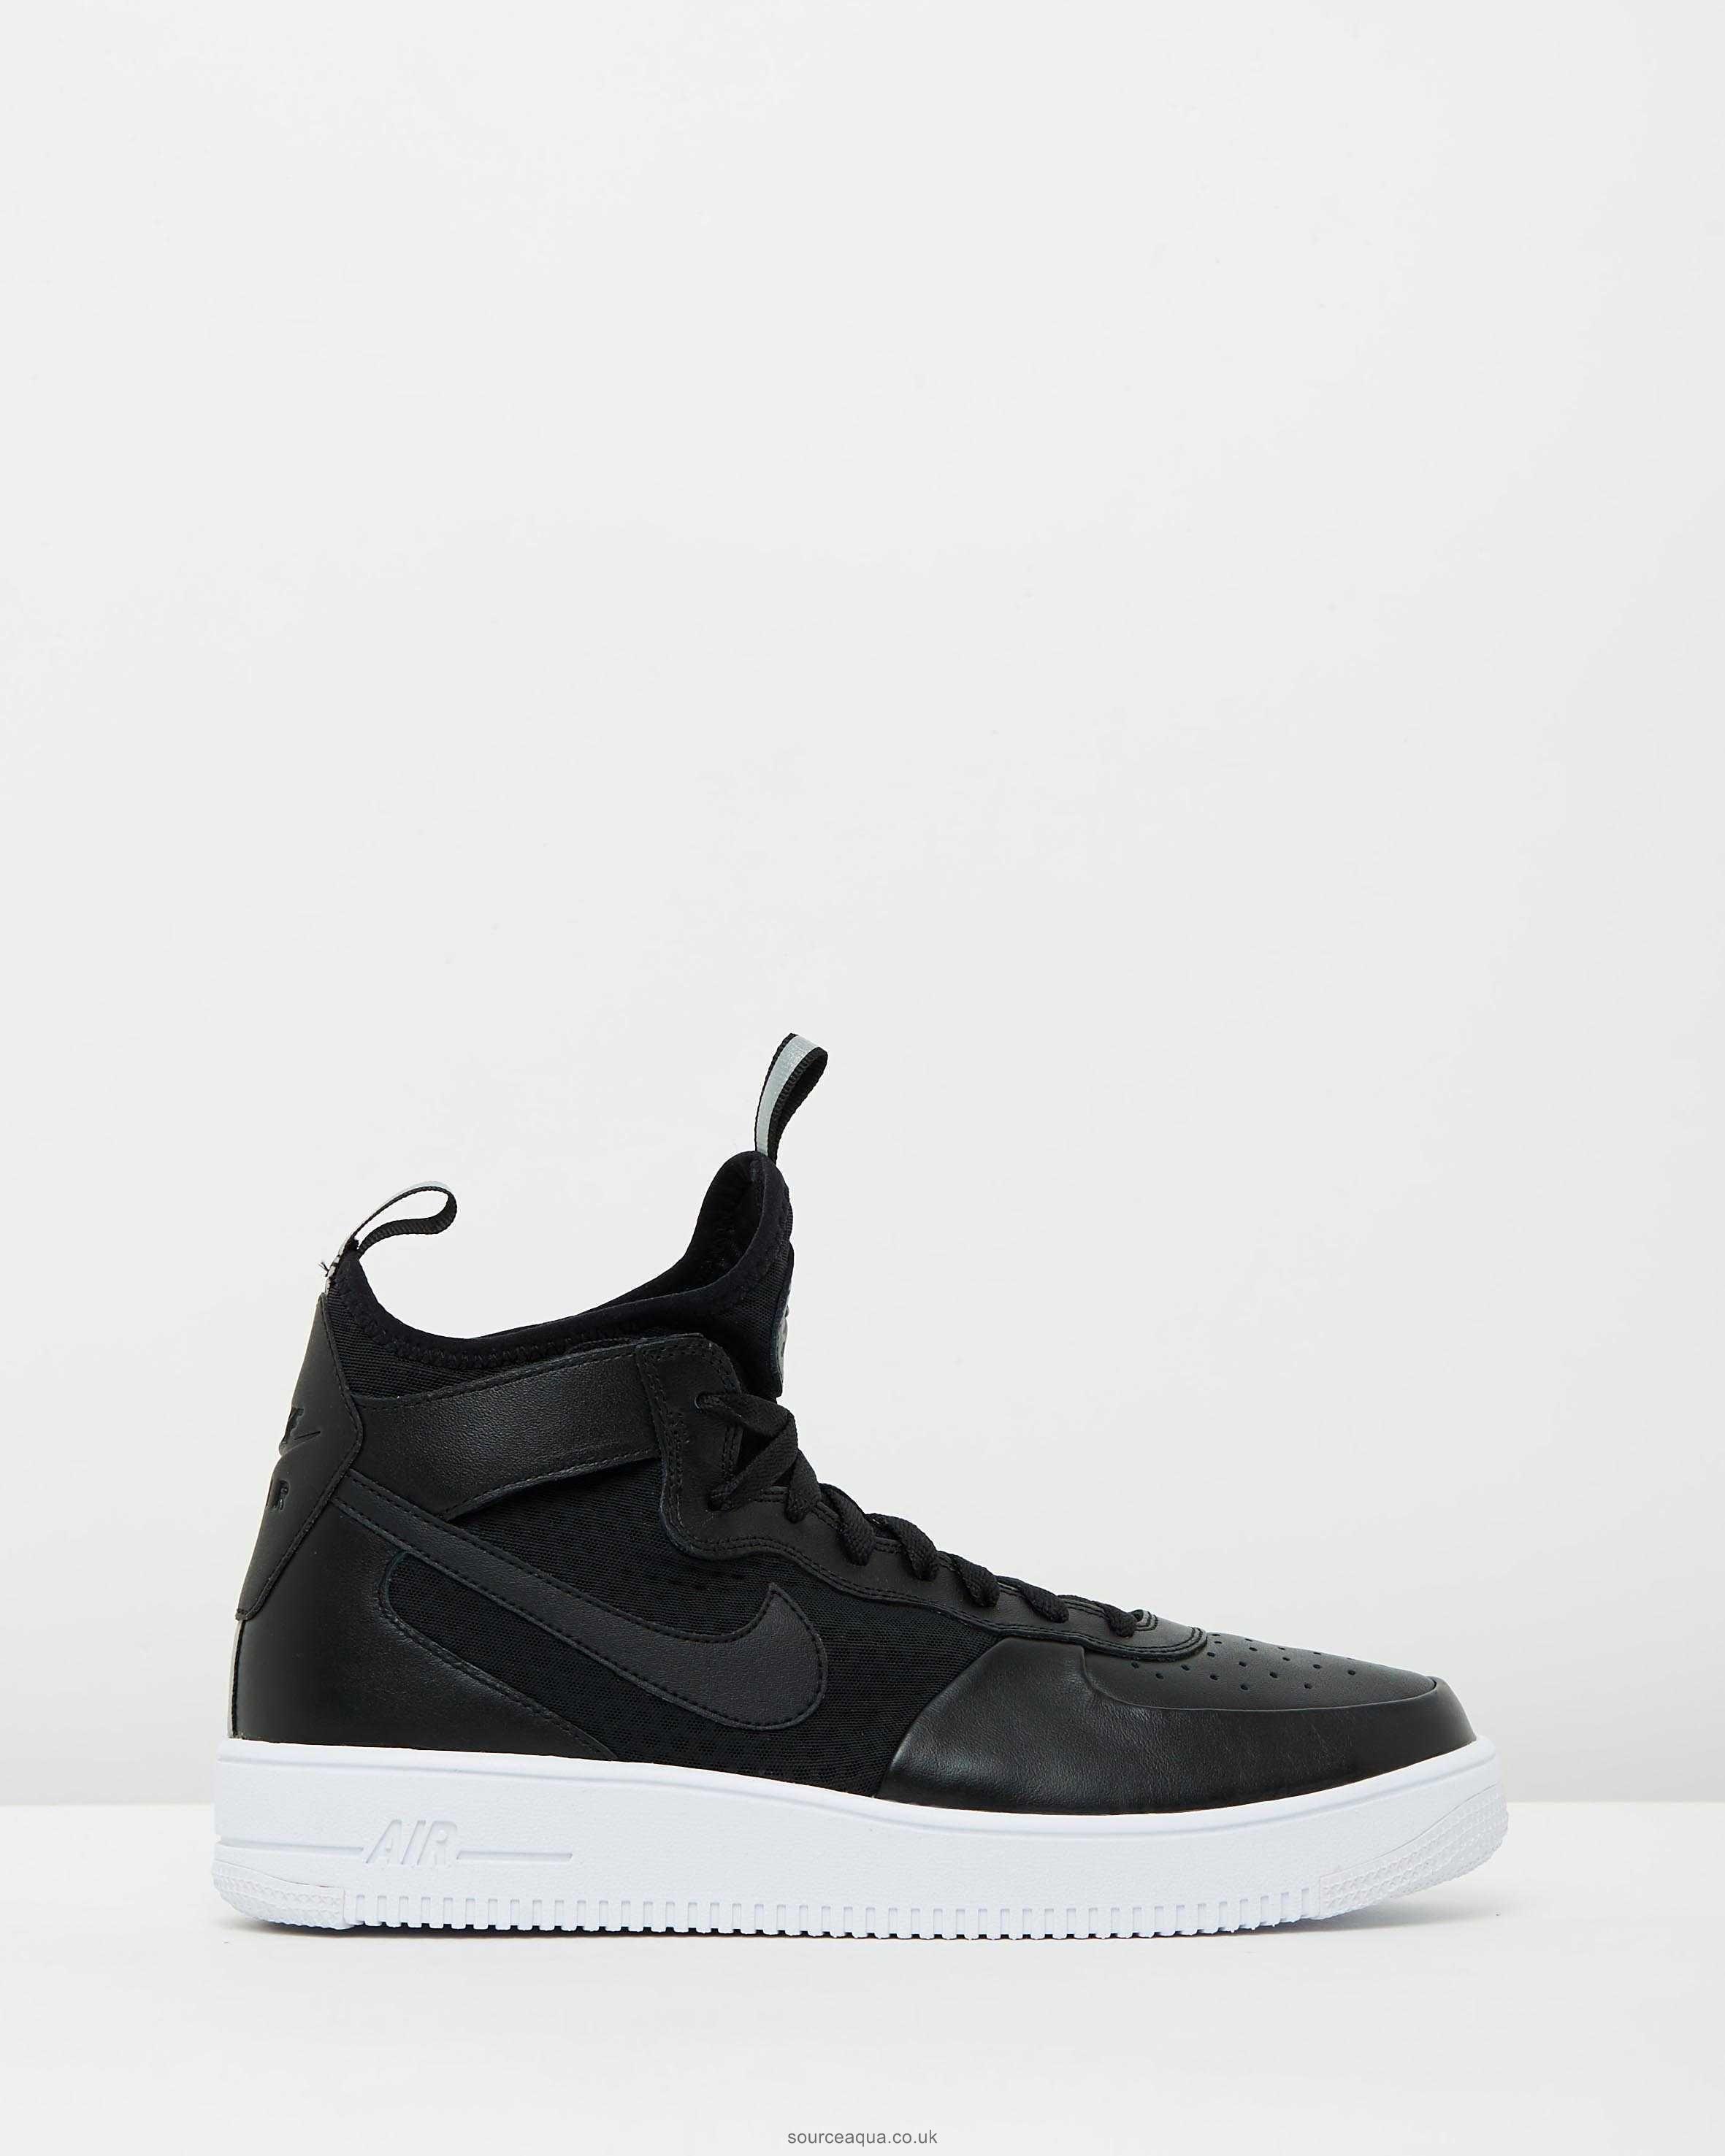 Black and White Air Force Logo - Discount Authentic Nike Air Force 1 Ultraforce Mid Black & White Men